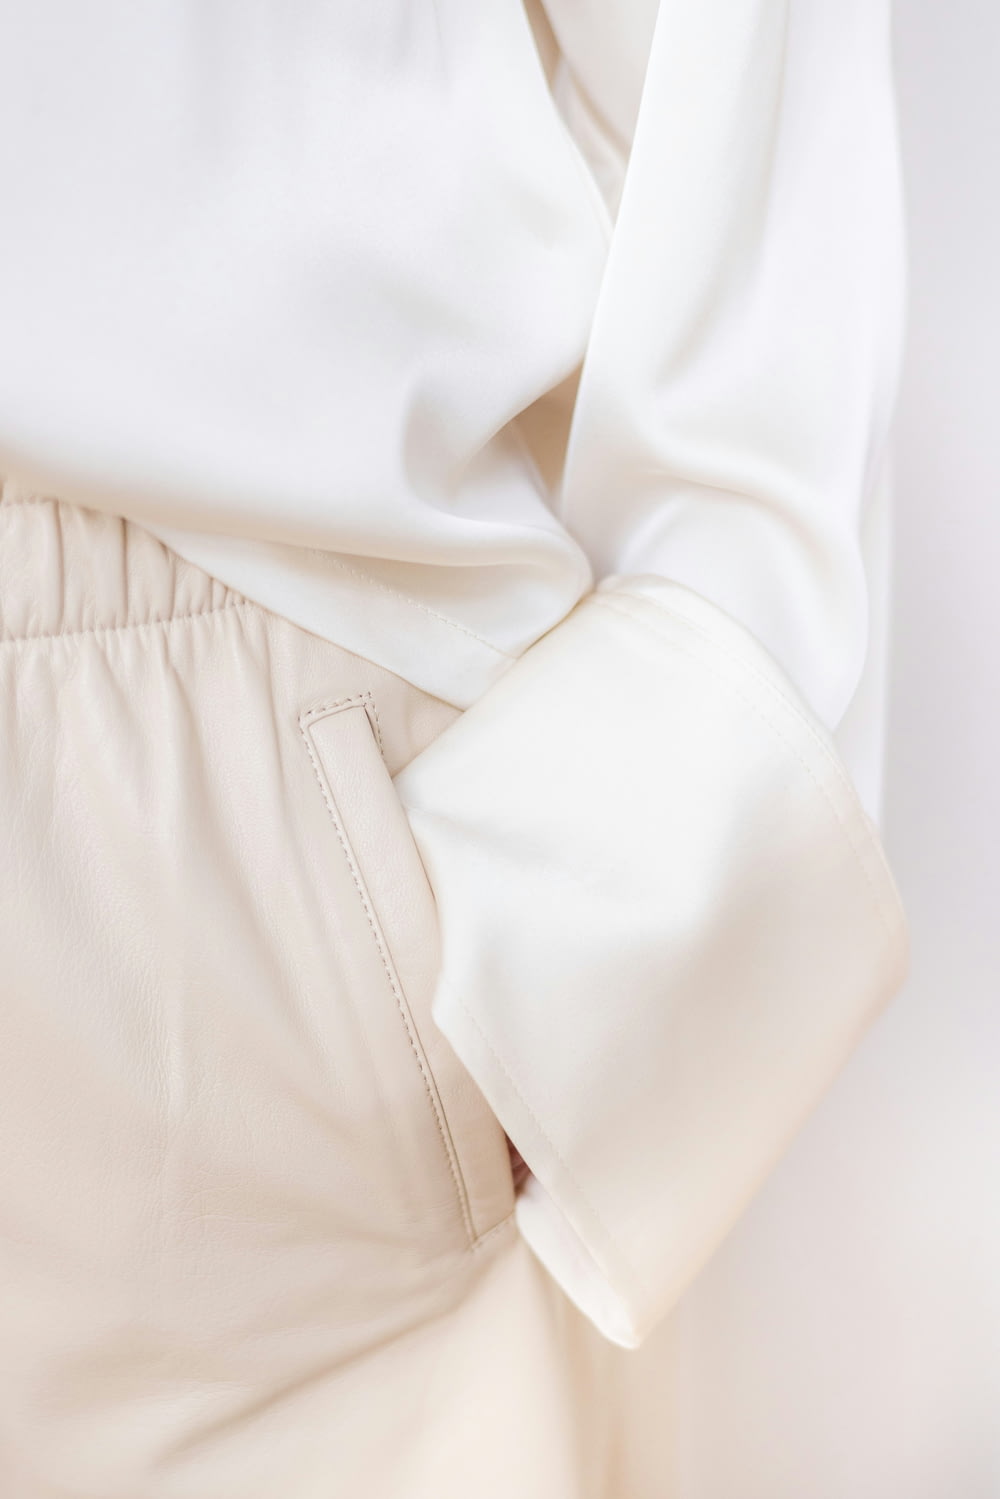 a close up of a white shirt and pants